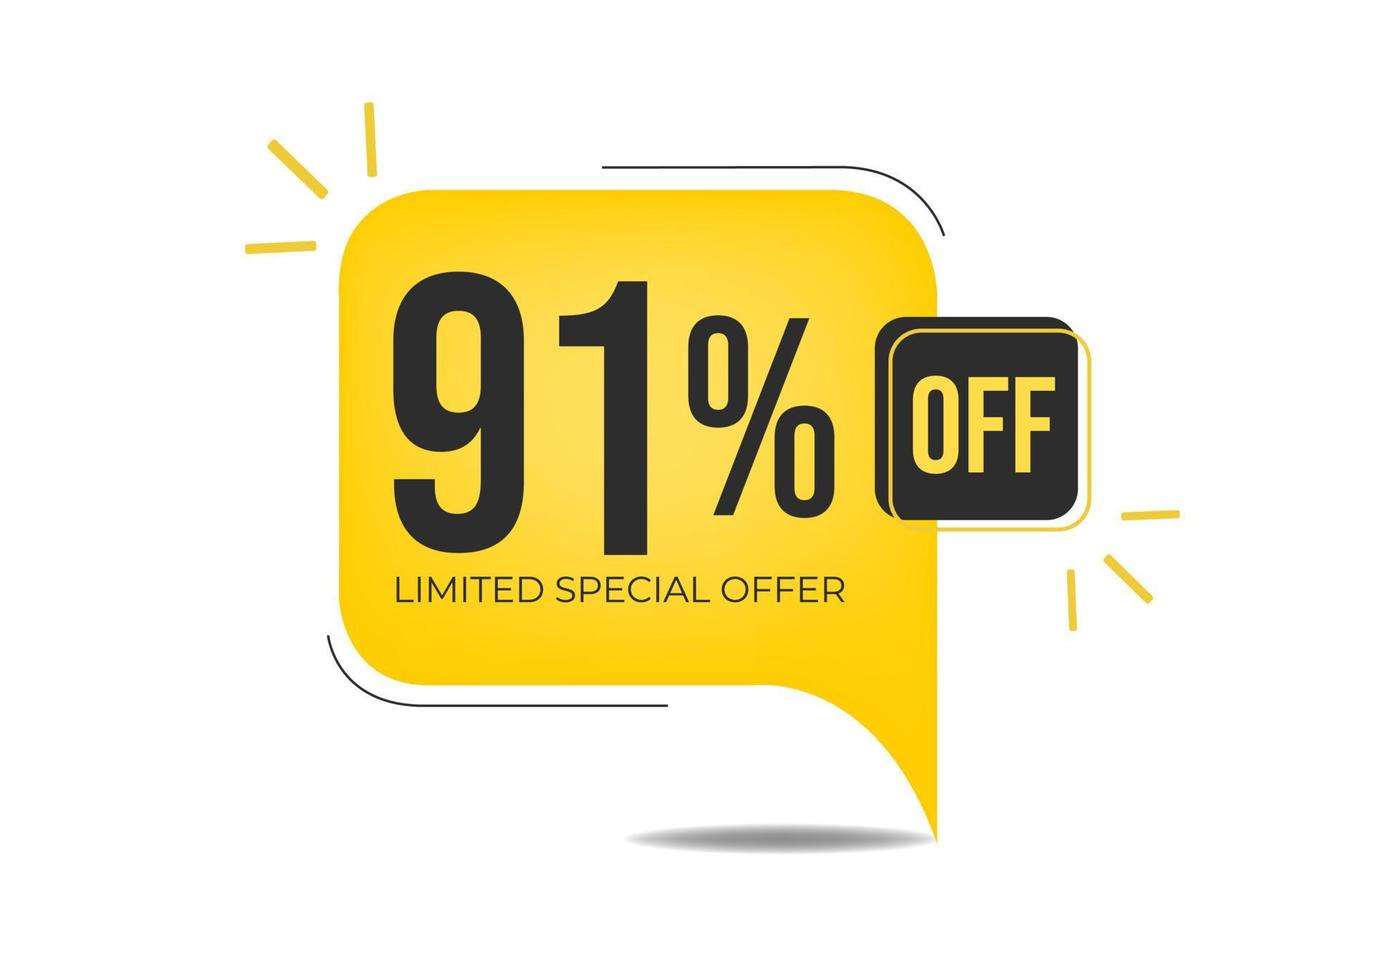 91 off limited special offer. Banner with ninety-one percent discount on a yellow square balloon. vector